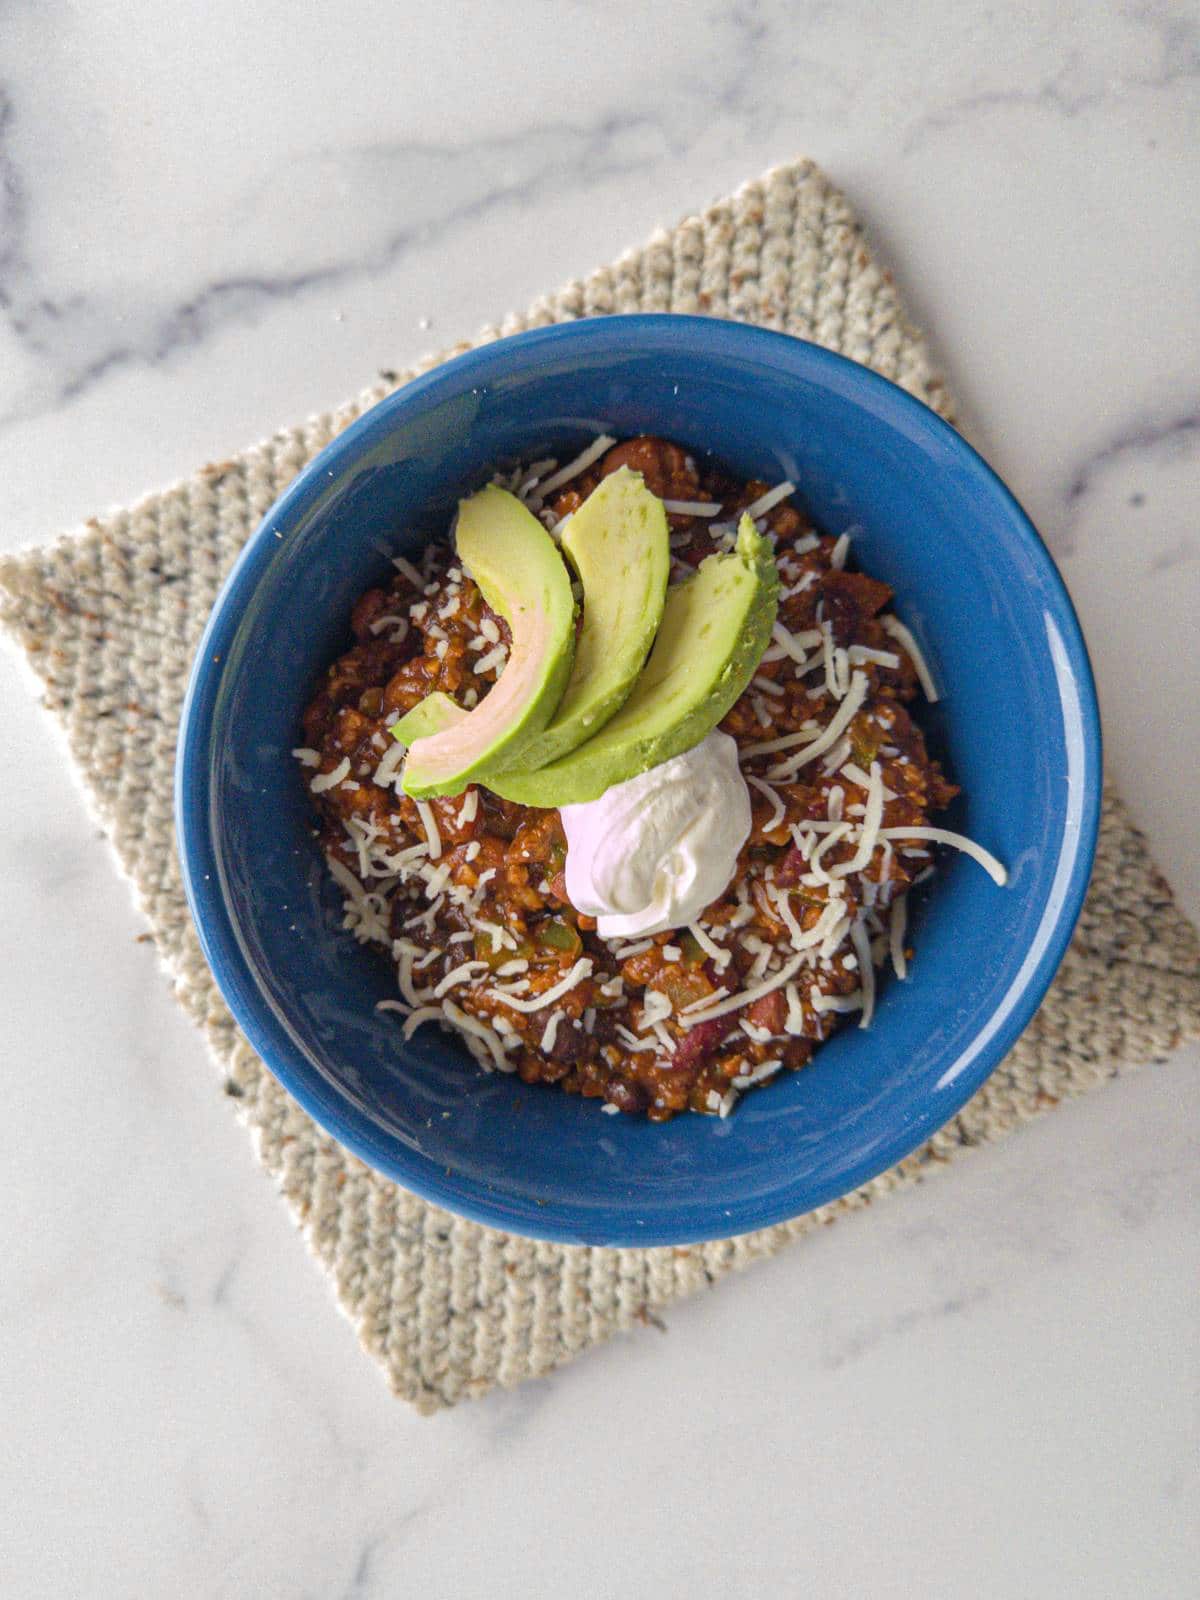 A bowl of thick and chunky chili topped with avocado.